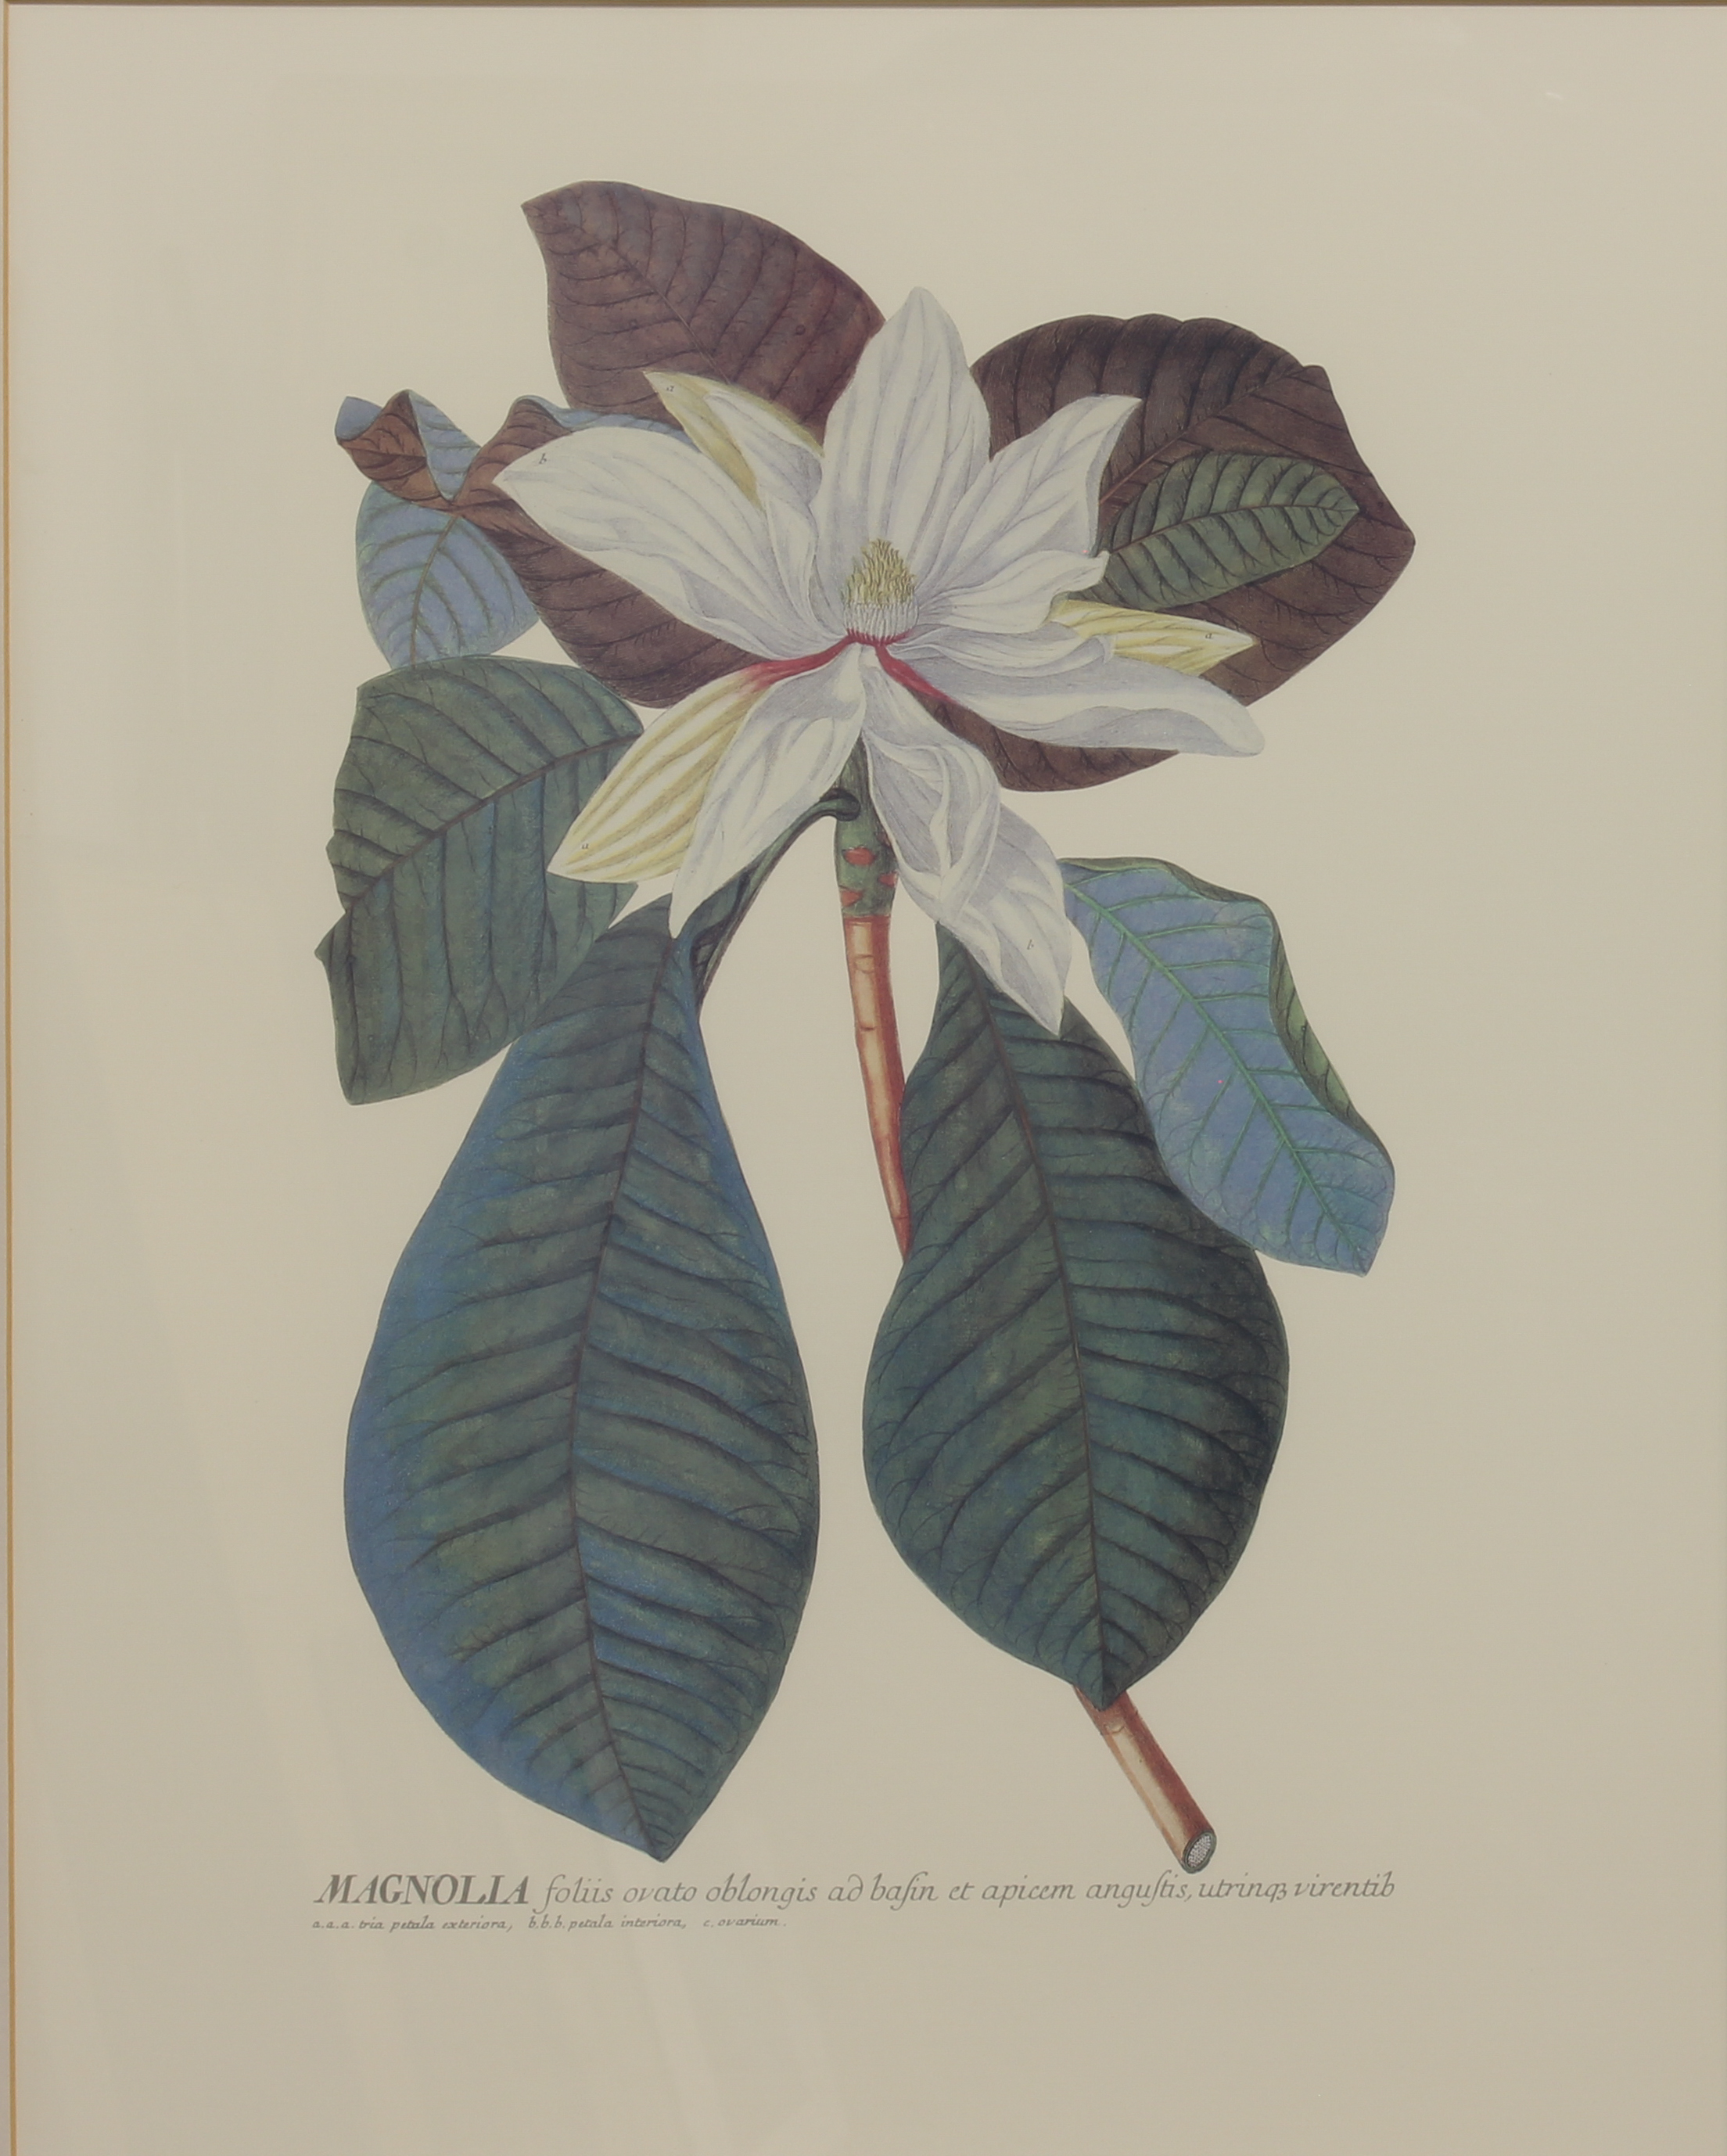 After Christophe Jacob Trew and Pierre Joseph Redoute: a set of three botanical prints - modern - Image 5 of 6